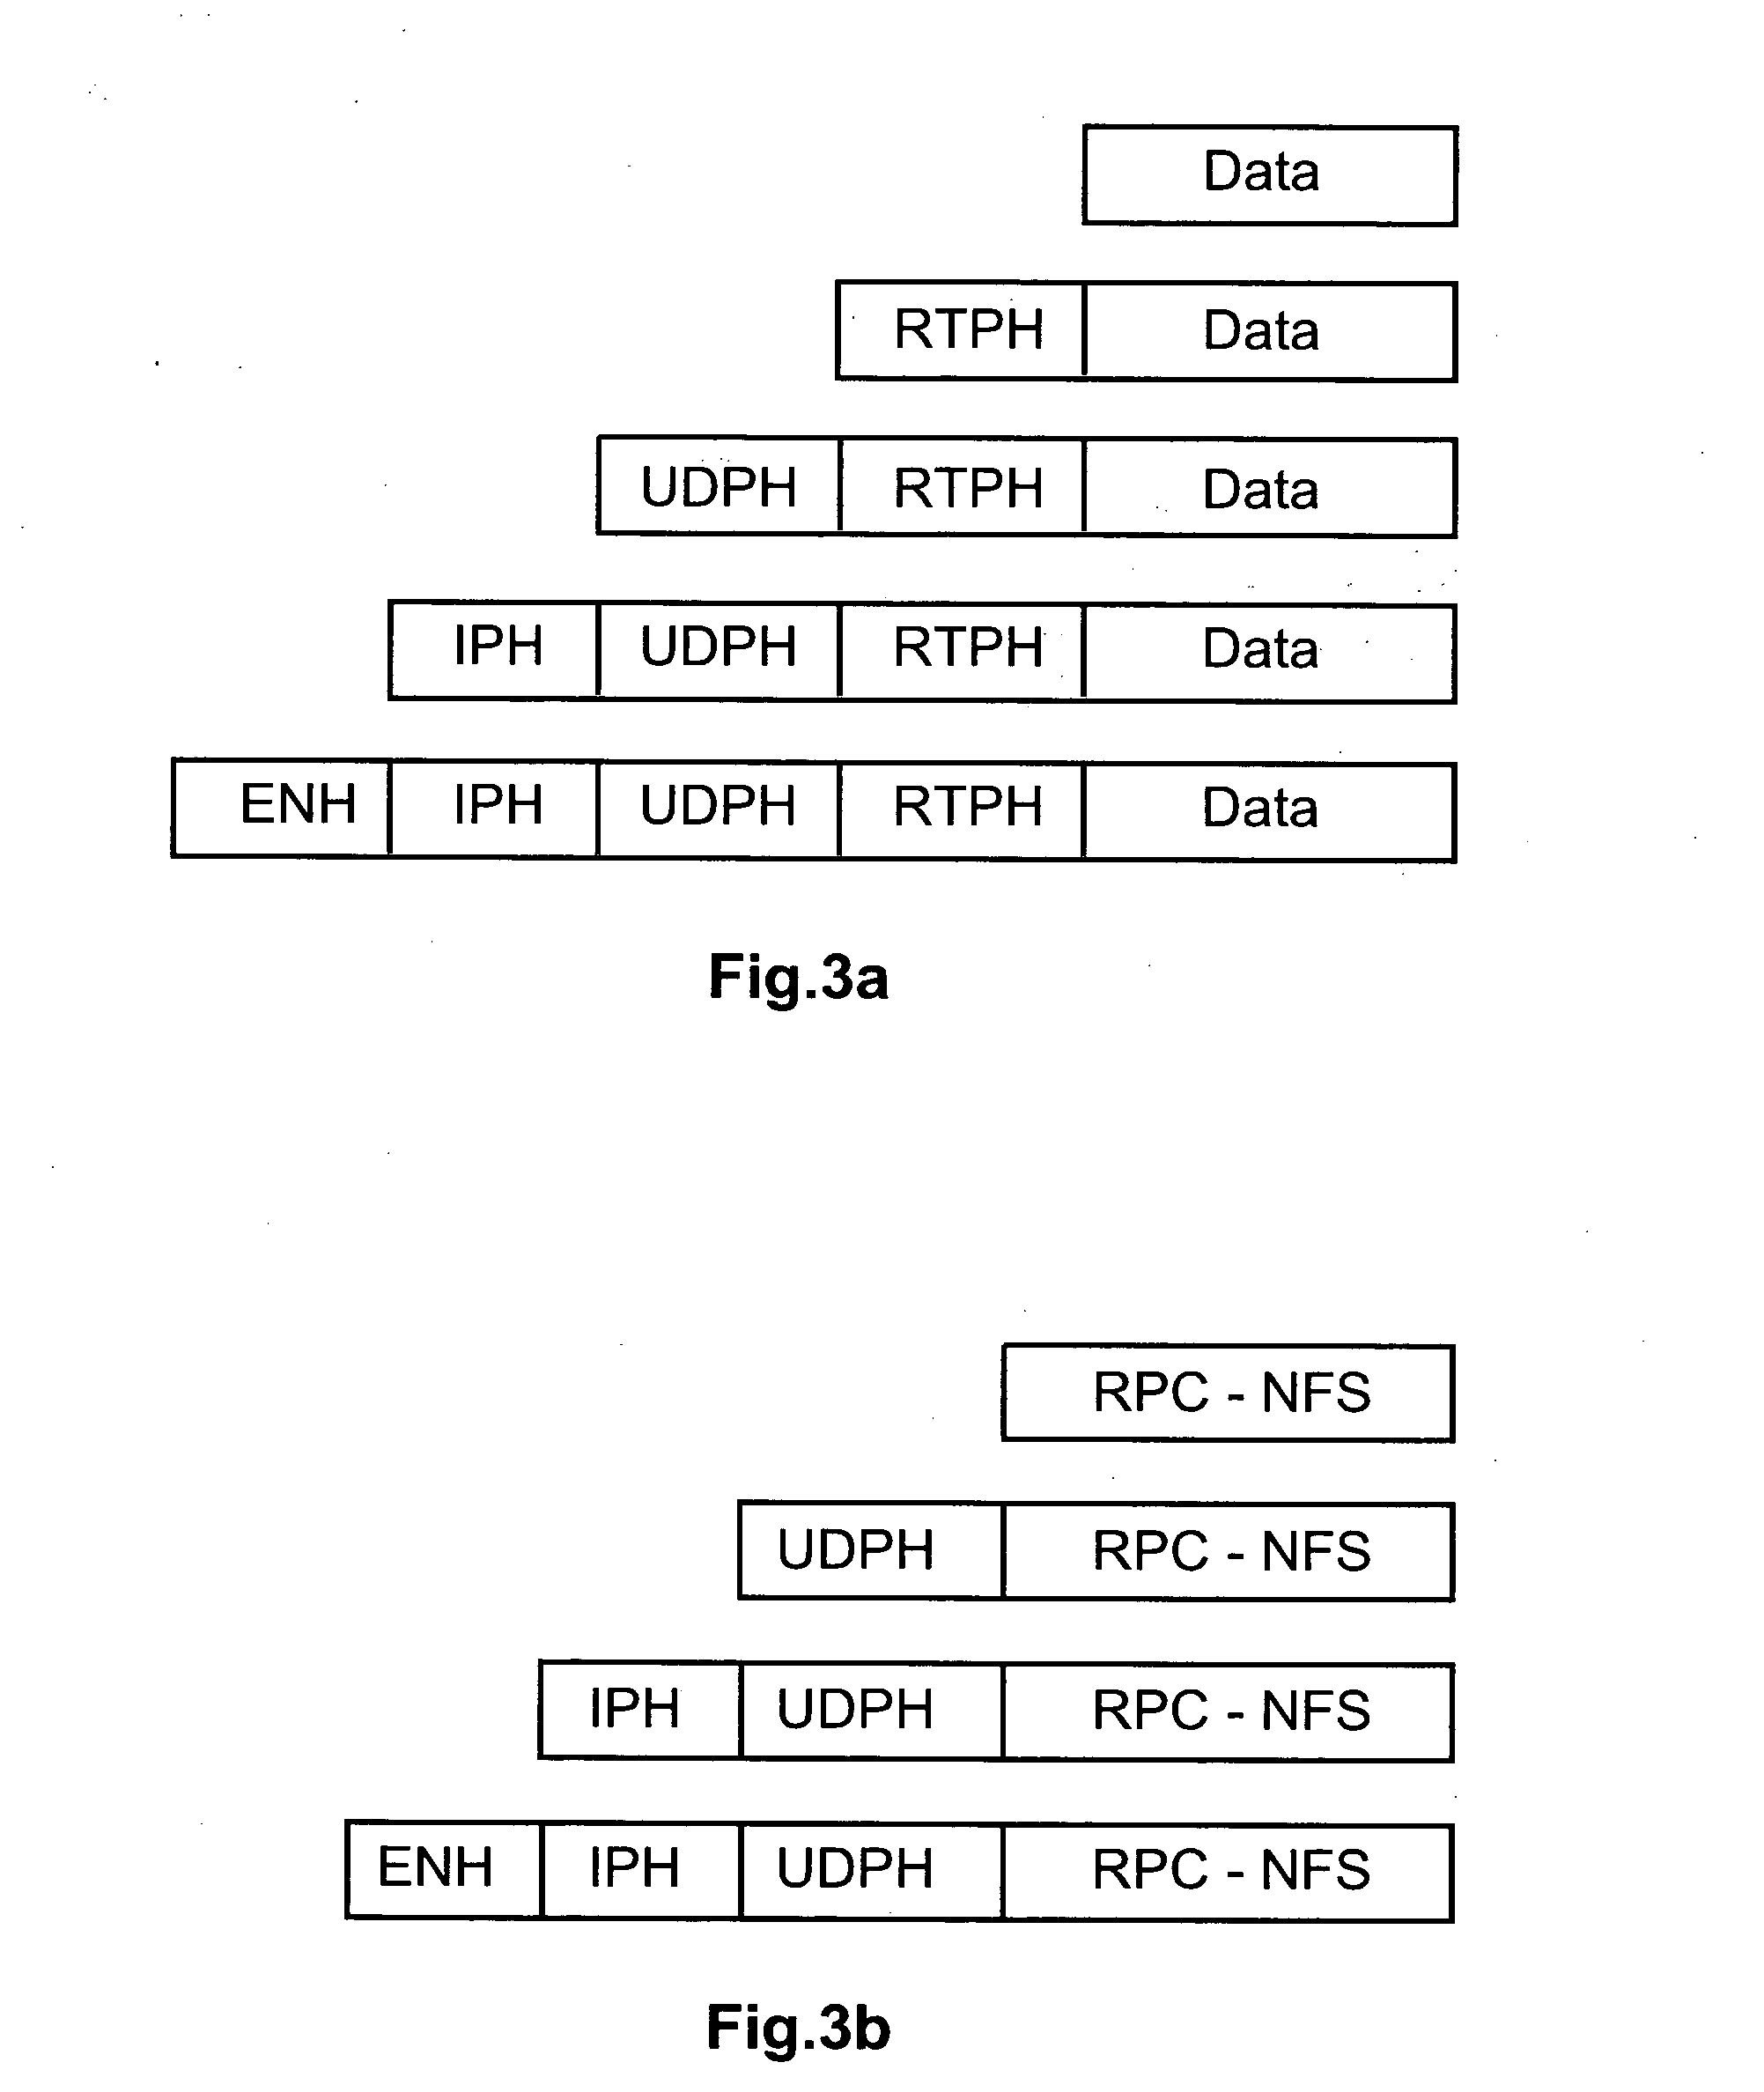 Method for performing data transport over a serial bus using Internet Protocol and apparatus for use in the method